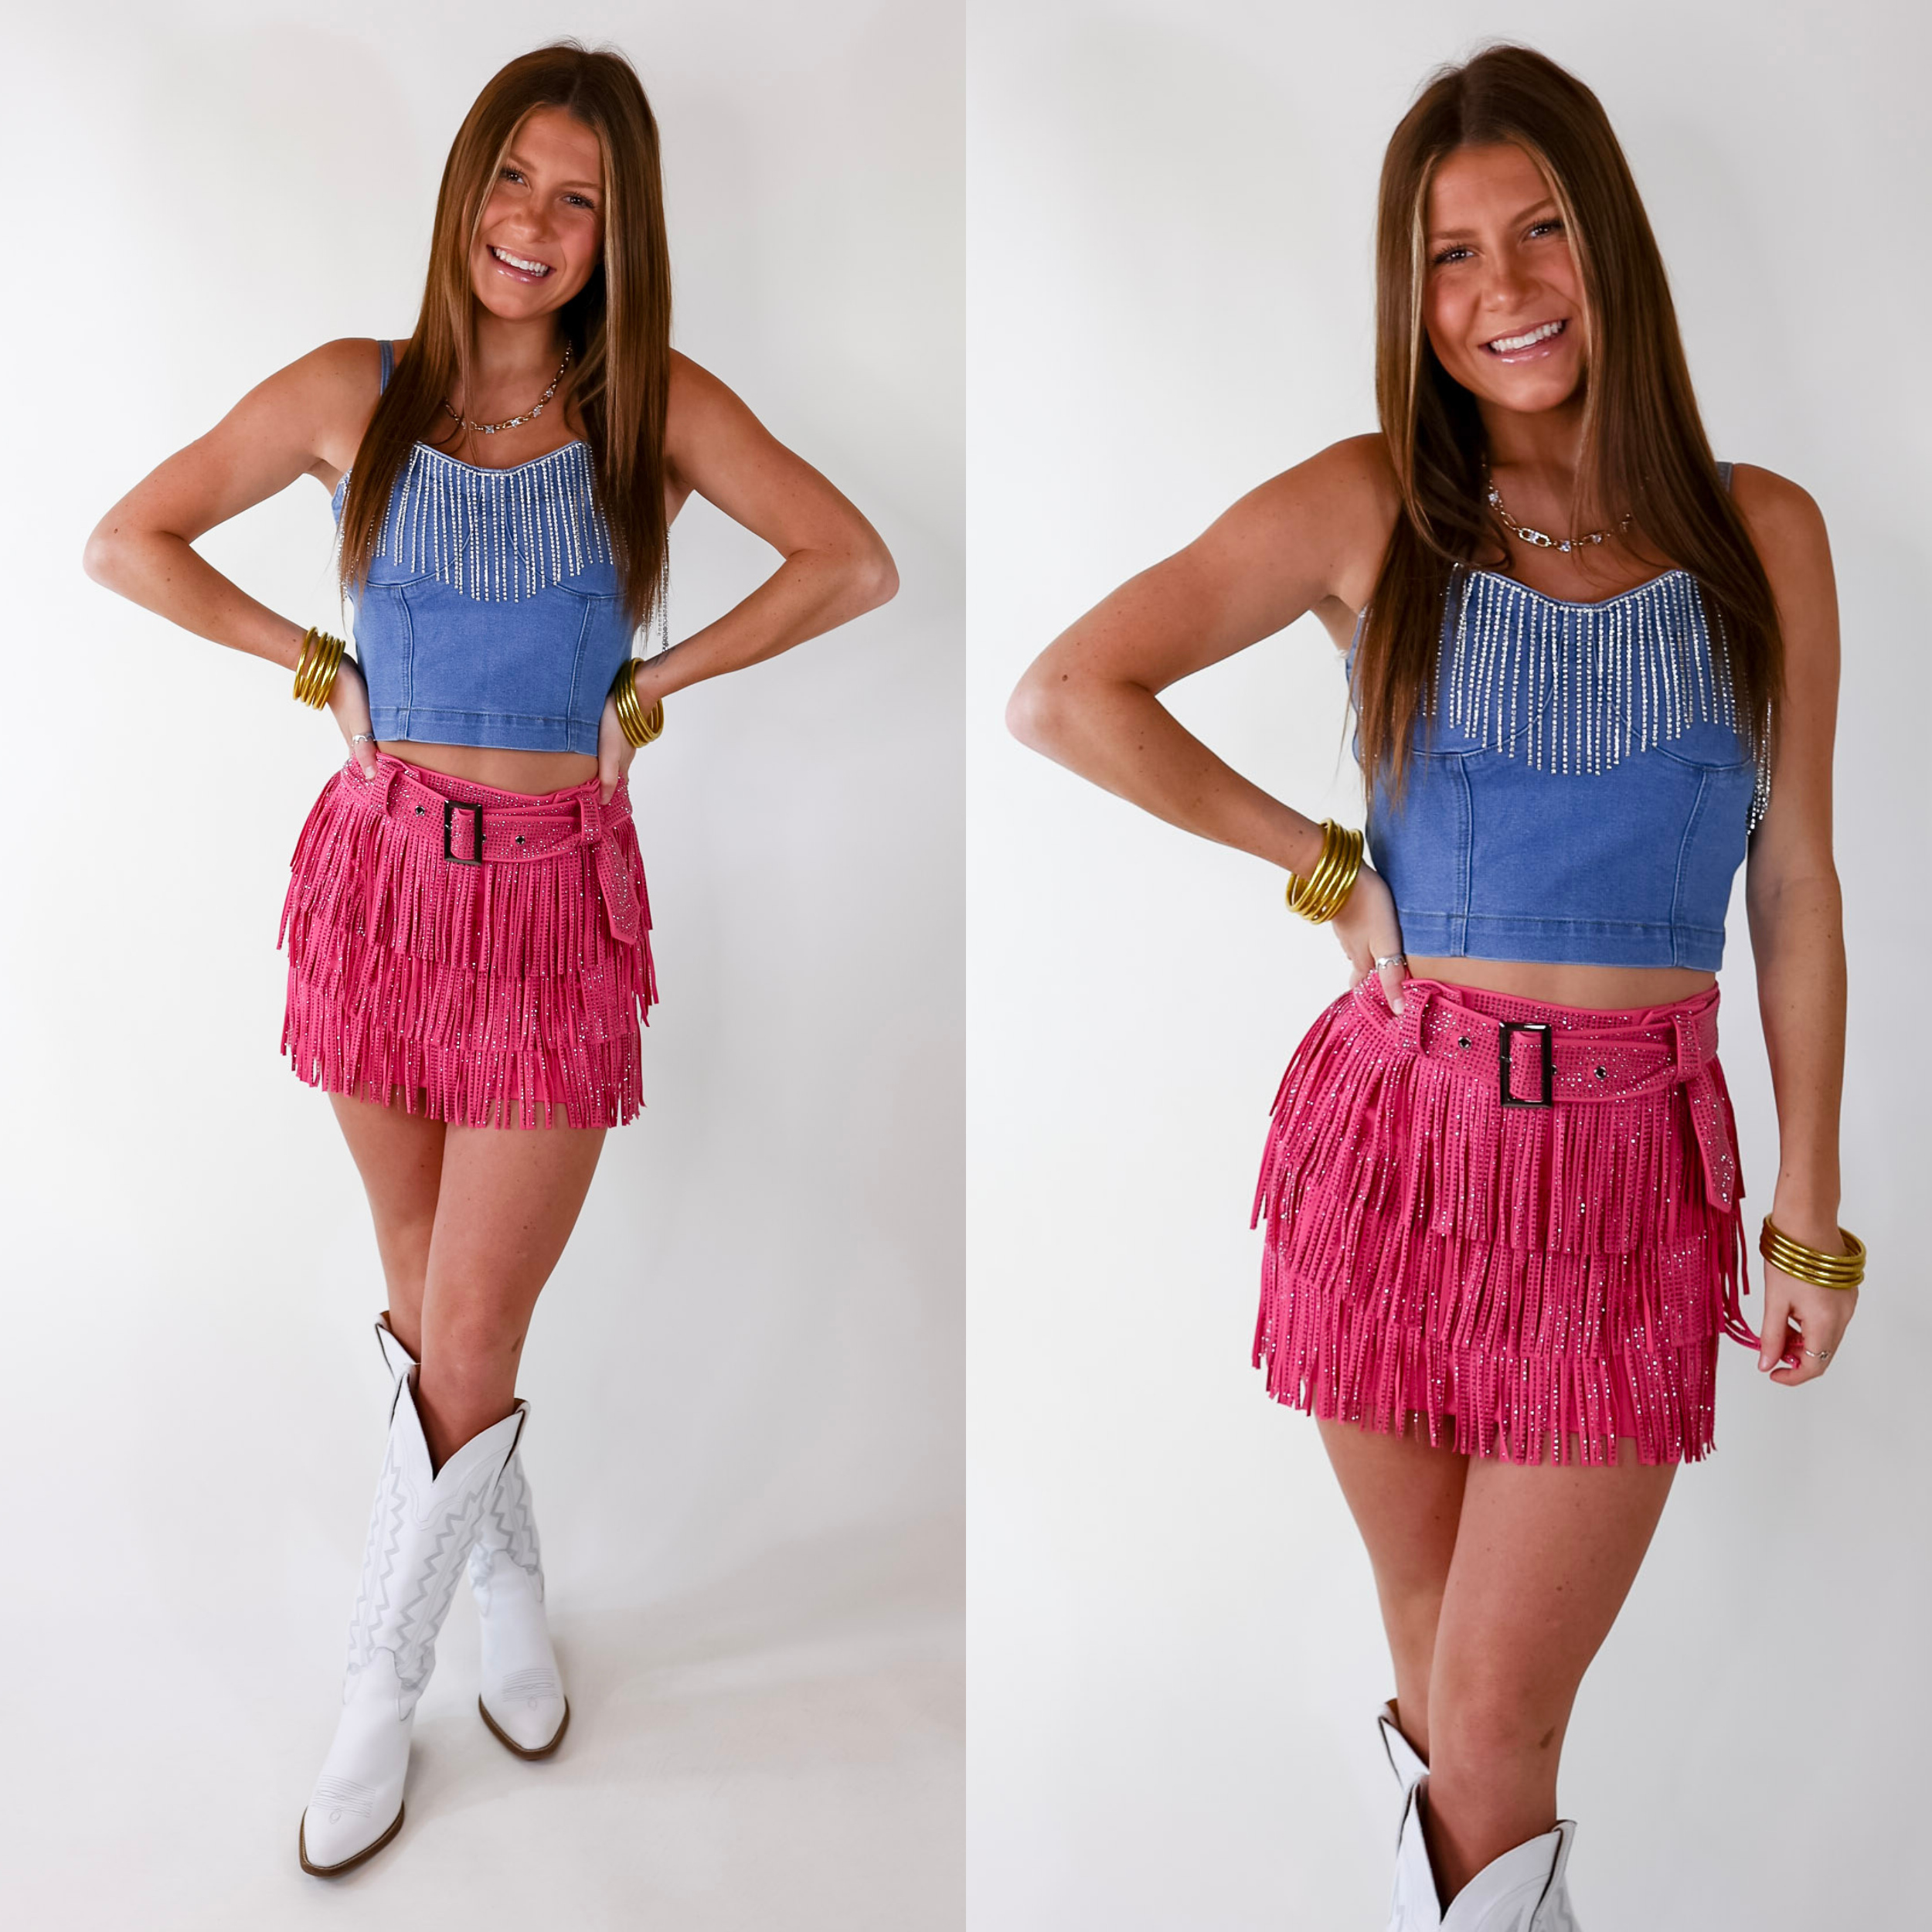 Model is wearing a cropped denim top featuring crystal fringe across the bust and spaghetti straps.